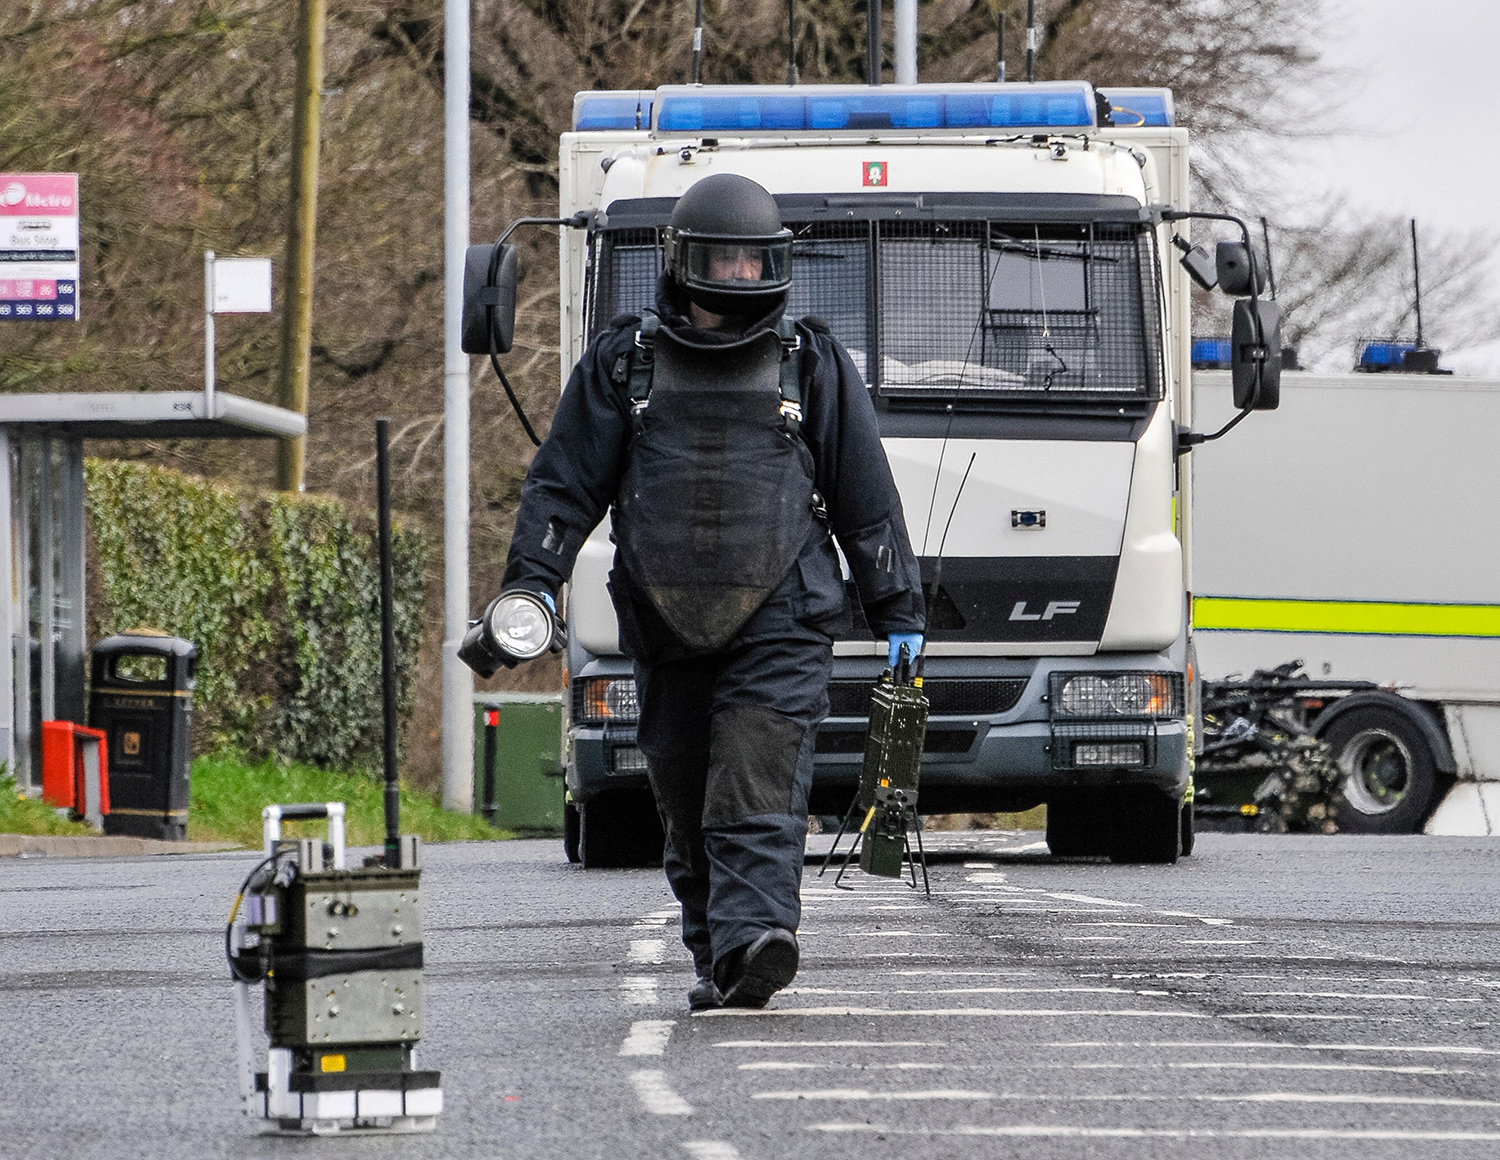 Next-generation Explosive Ordnance Disposal for the British Army